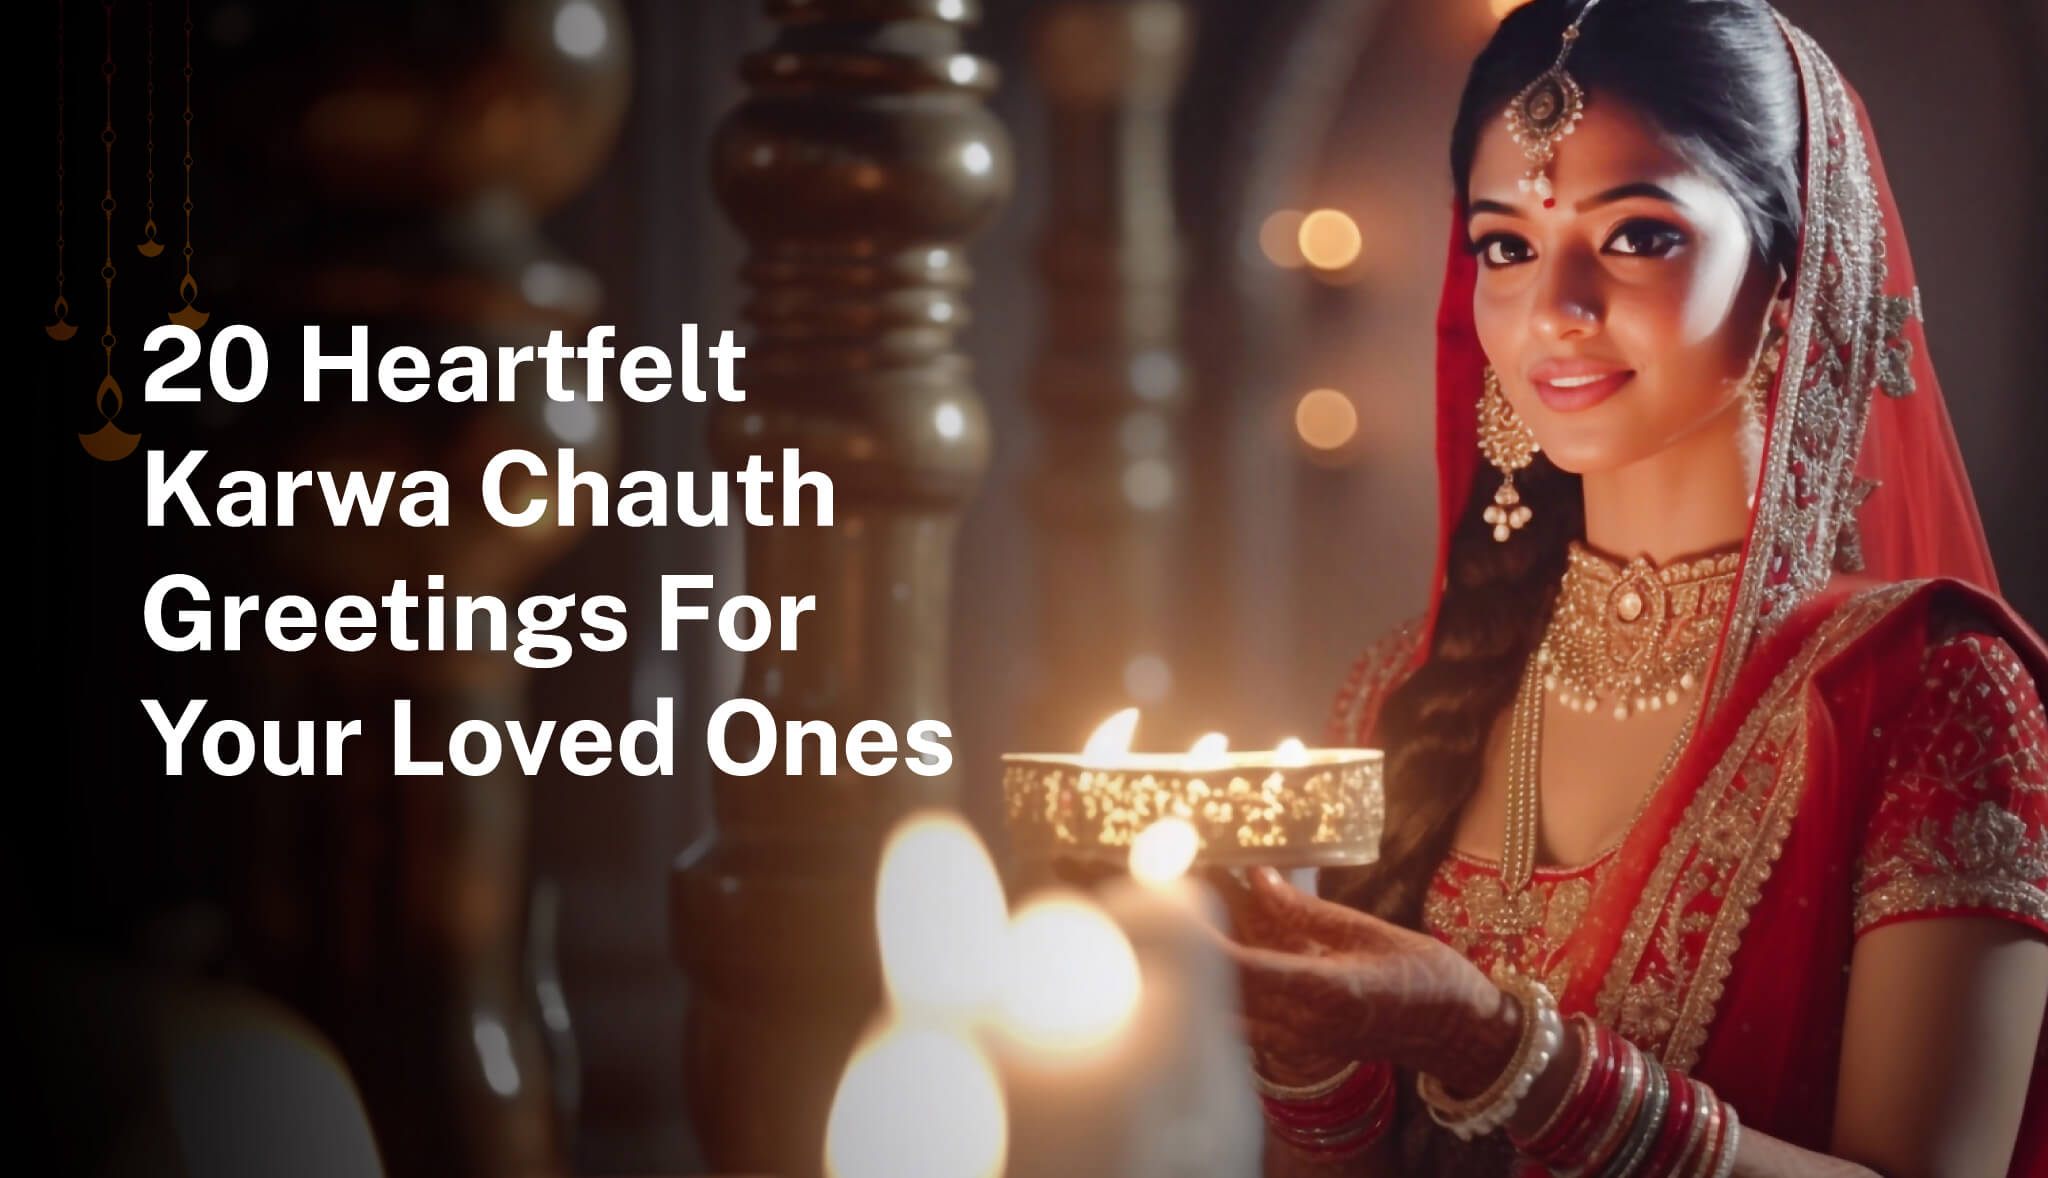 20 Heartfelt Karwa Chauth Greetings to Express Your Love - Postive